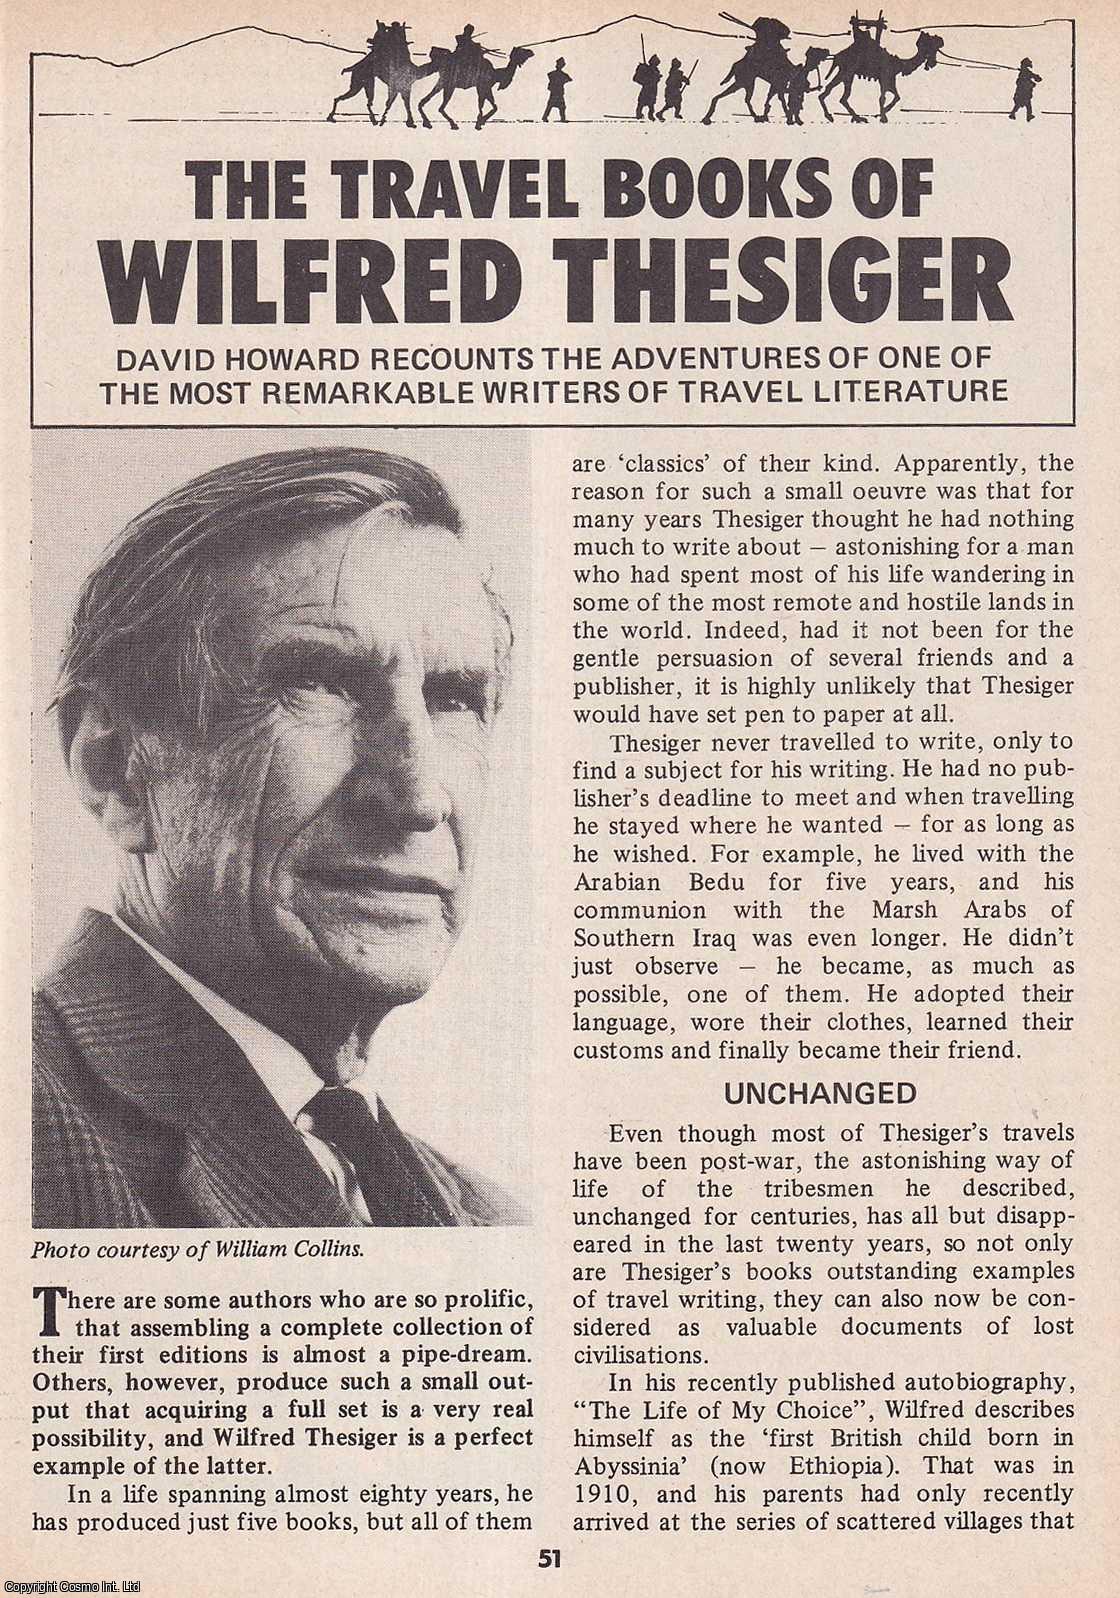 David Howard - Travel Literature : The Travel Books of Wilfred Thesiger. This is an original article separated from an issue of The Book & Magazine Collector publication, 1989.